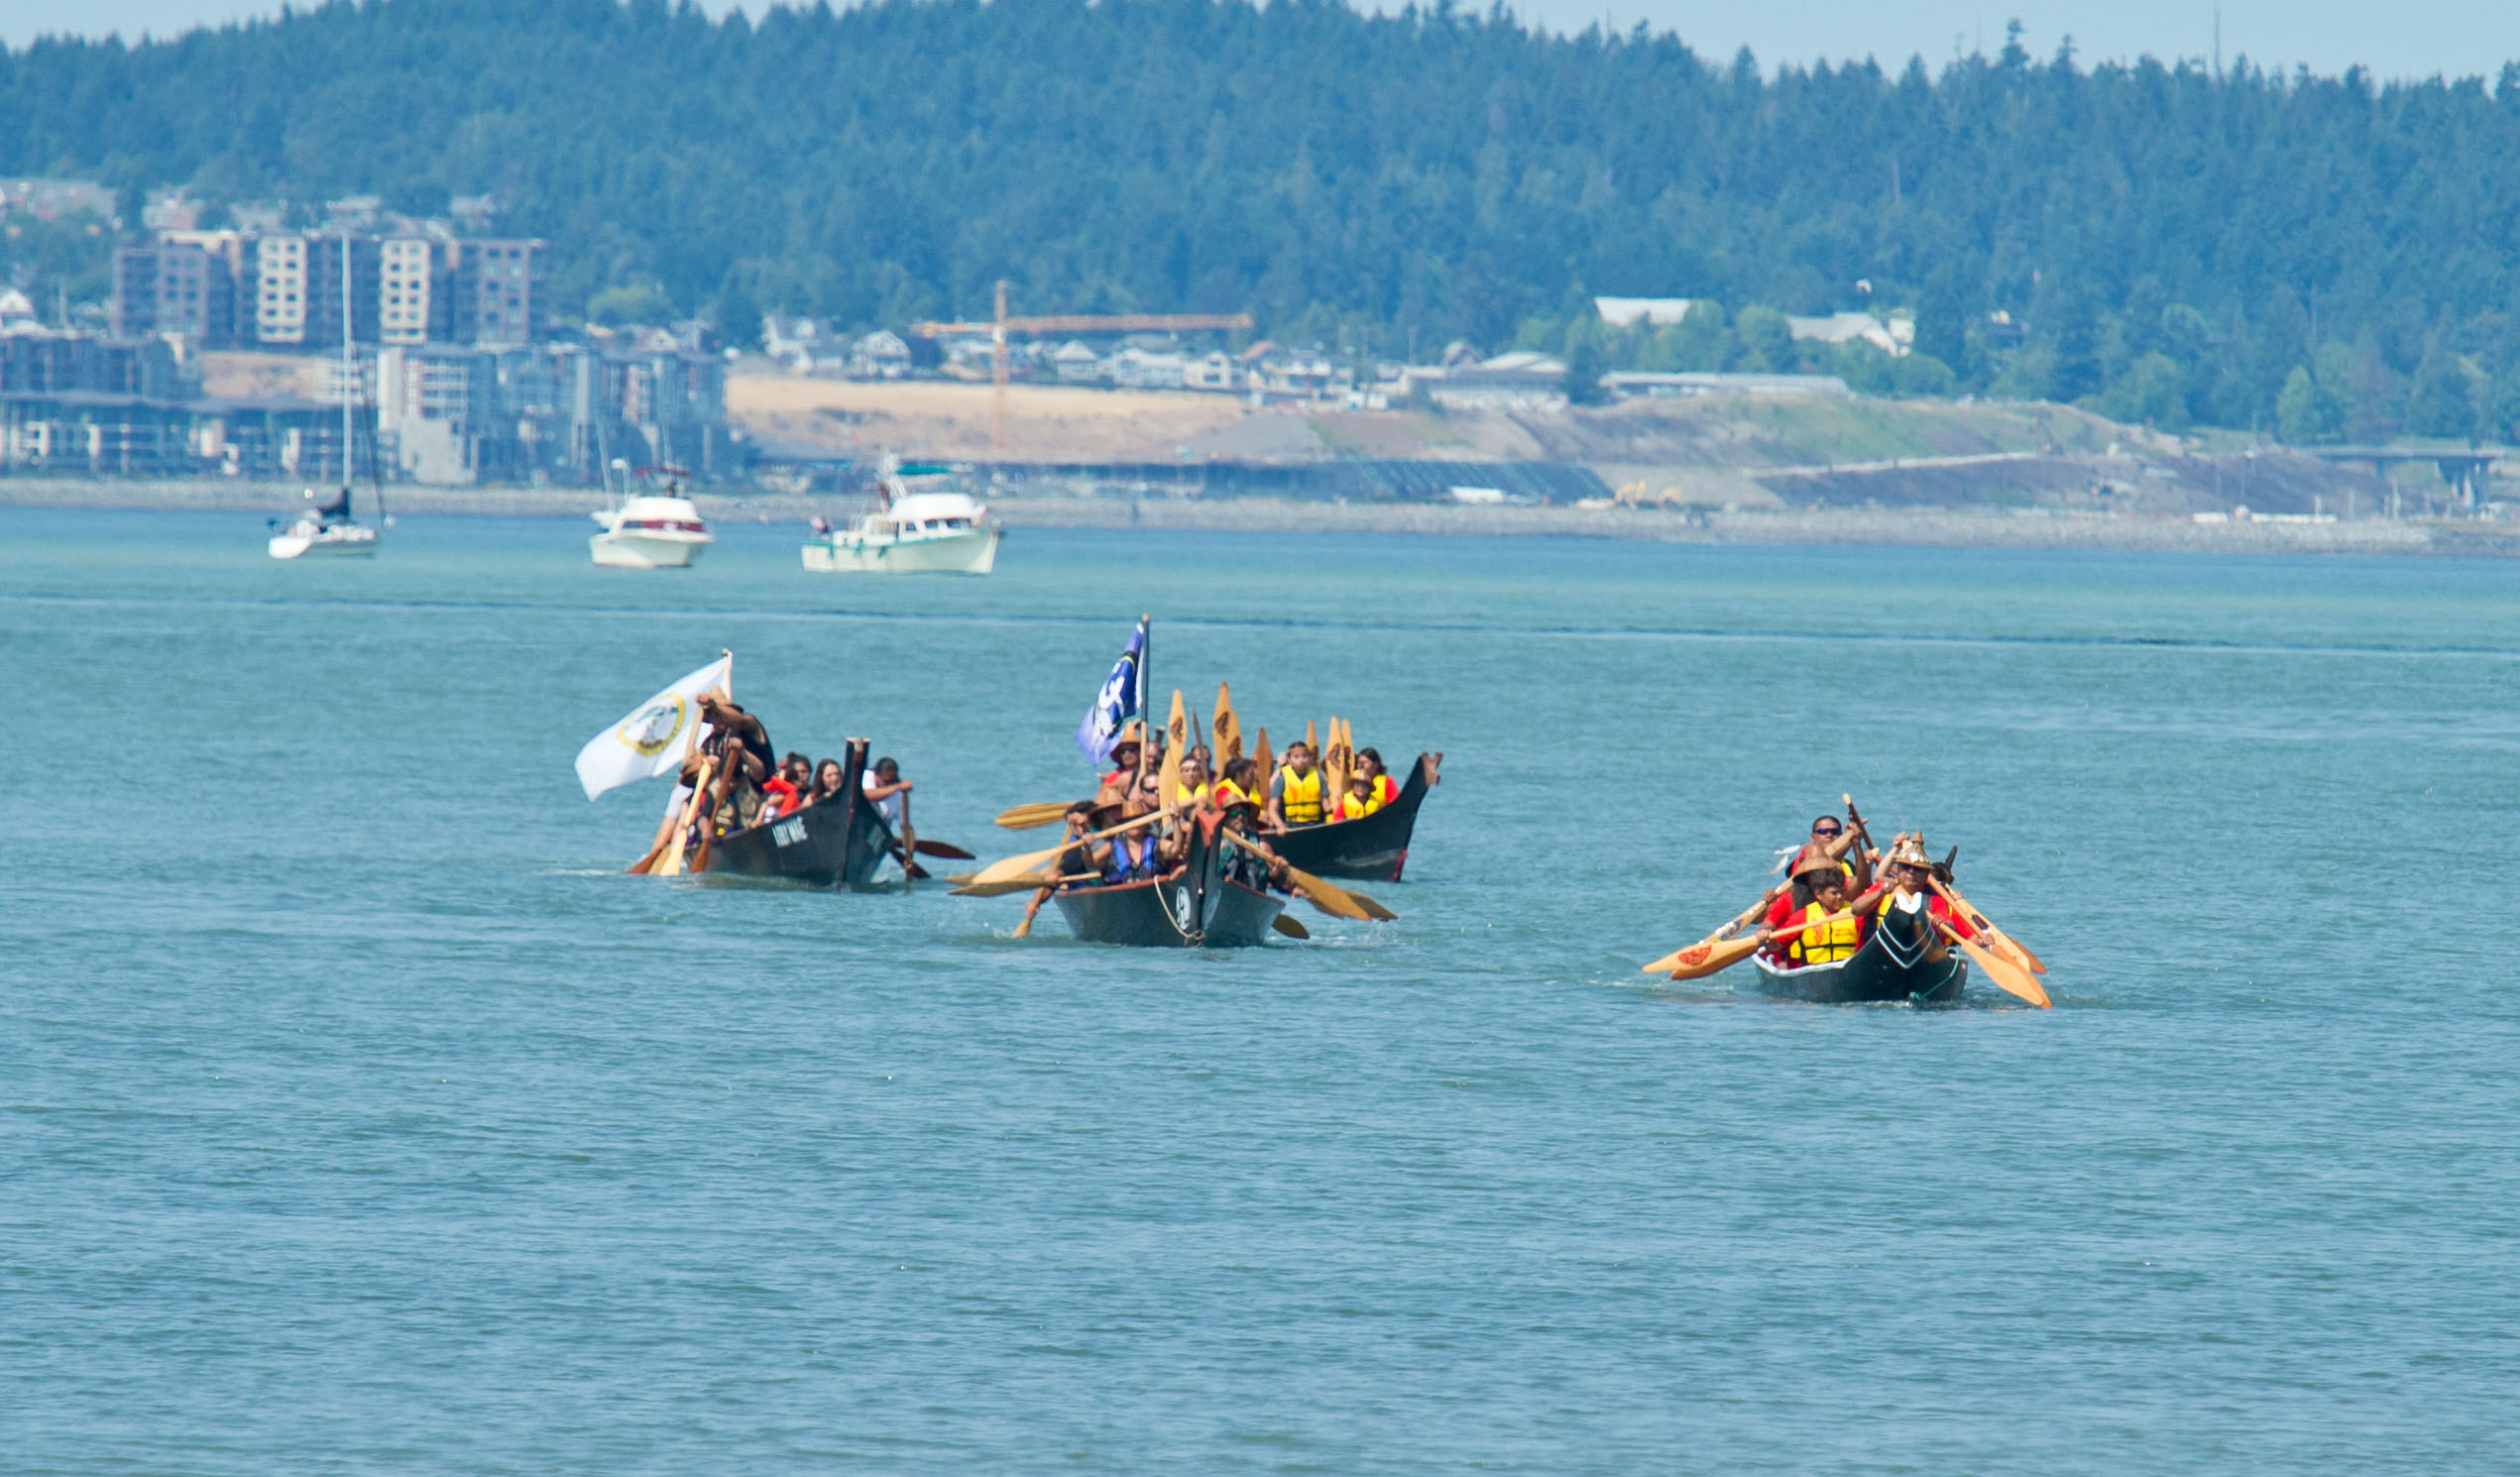 Power Paddle to Puyallup, the annual Native American traditional canoe gathering that takes place along the west coast of Washington and Canada, this year hosted by the Puyallup Tribe, Saturday, July 28, 2018. (Photo by John Froschauer/PLU)